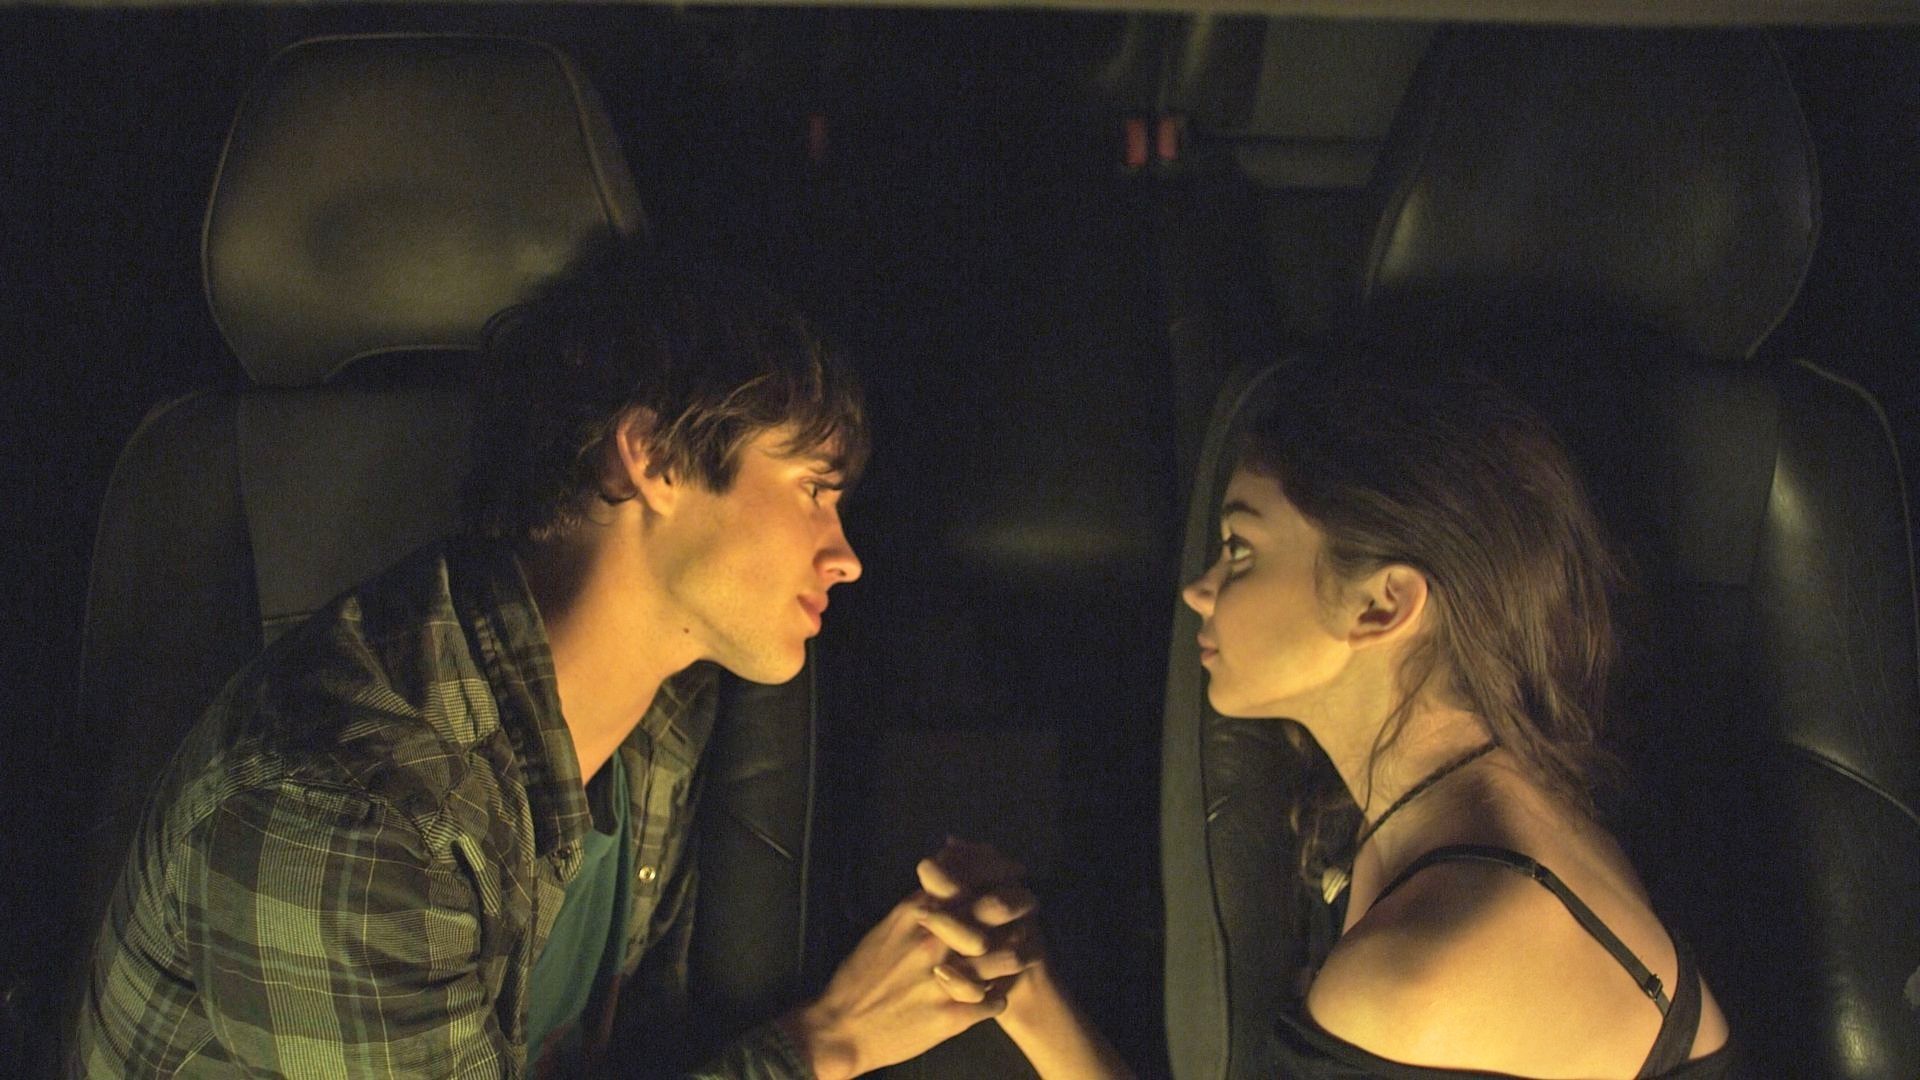 Matt Prokop stars as J.T. and Sarah Hyland stars as Tracey in Tribeca Film's Conception (2012). Photo credit by Noah Rosenthal.